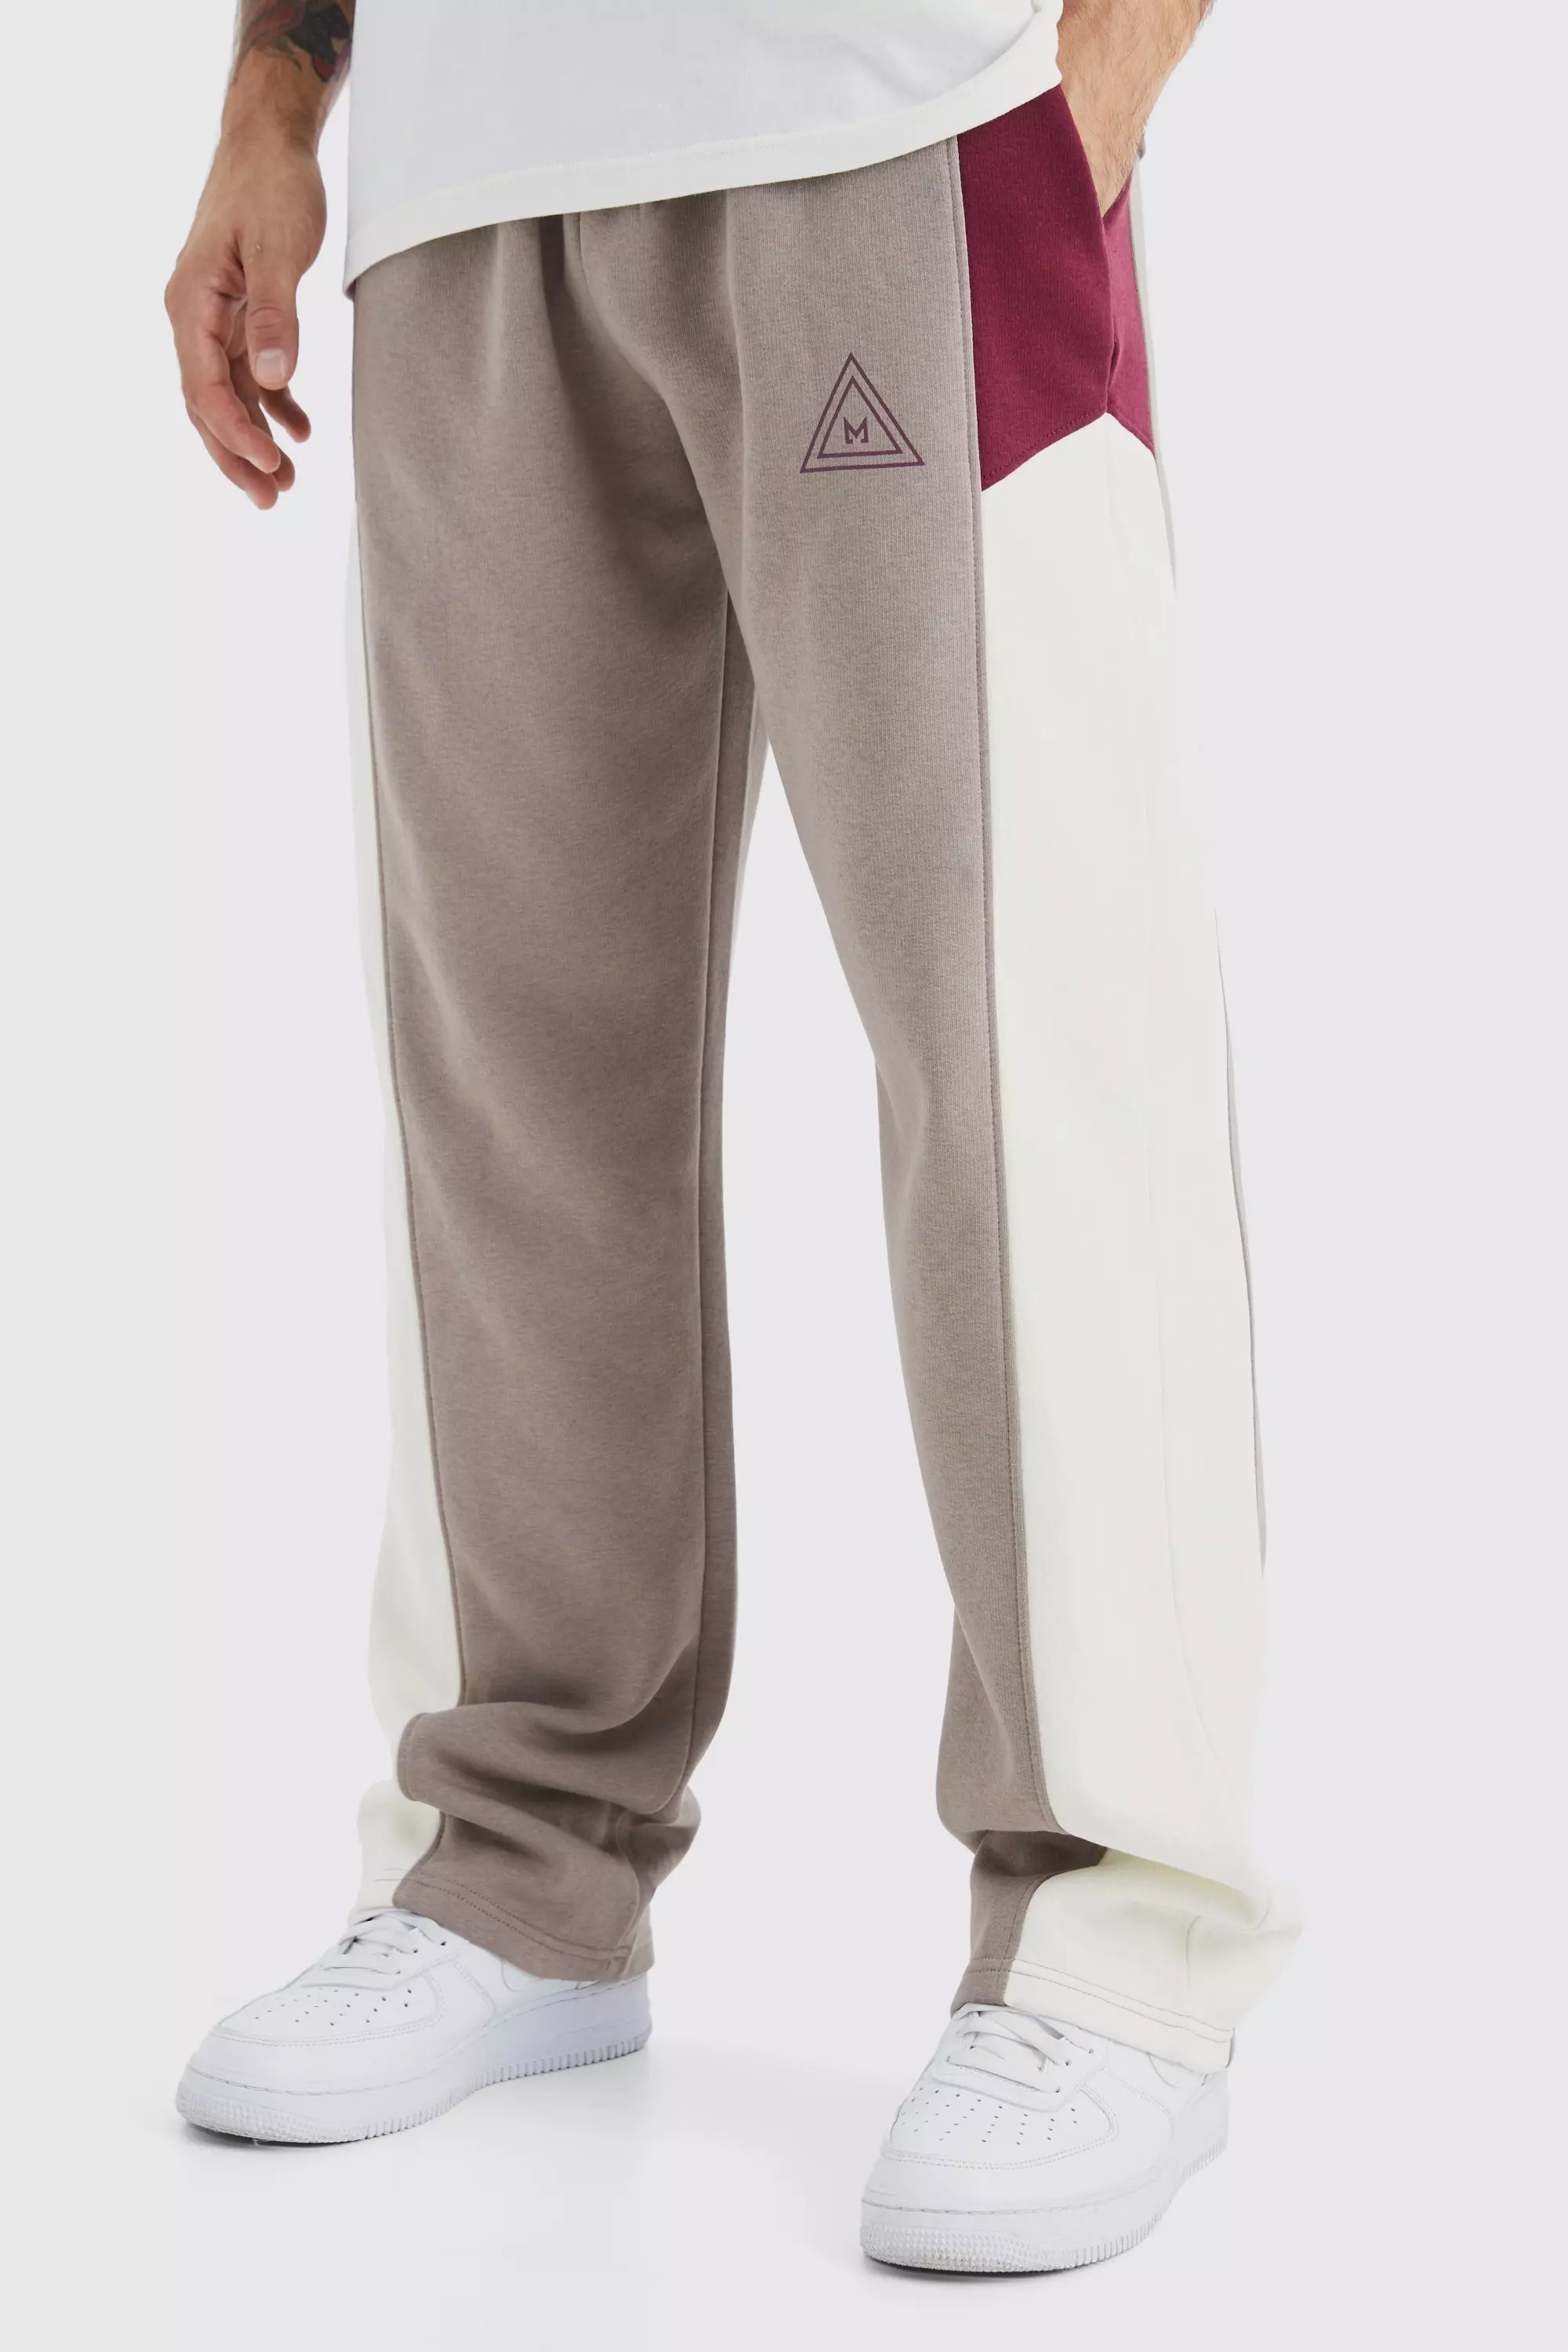 Relaxed Colour Block Branded Sweatpants Burgundy